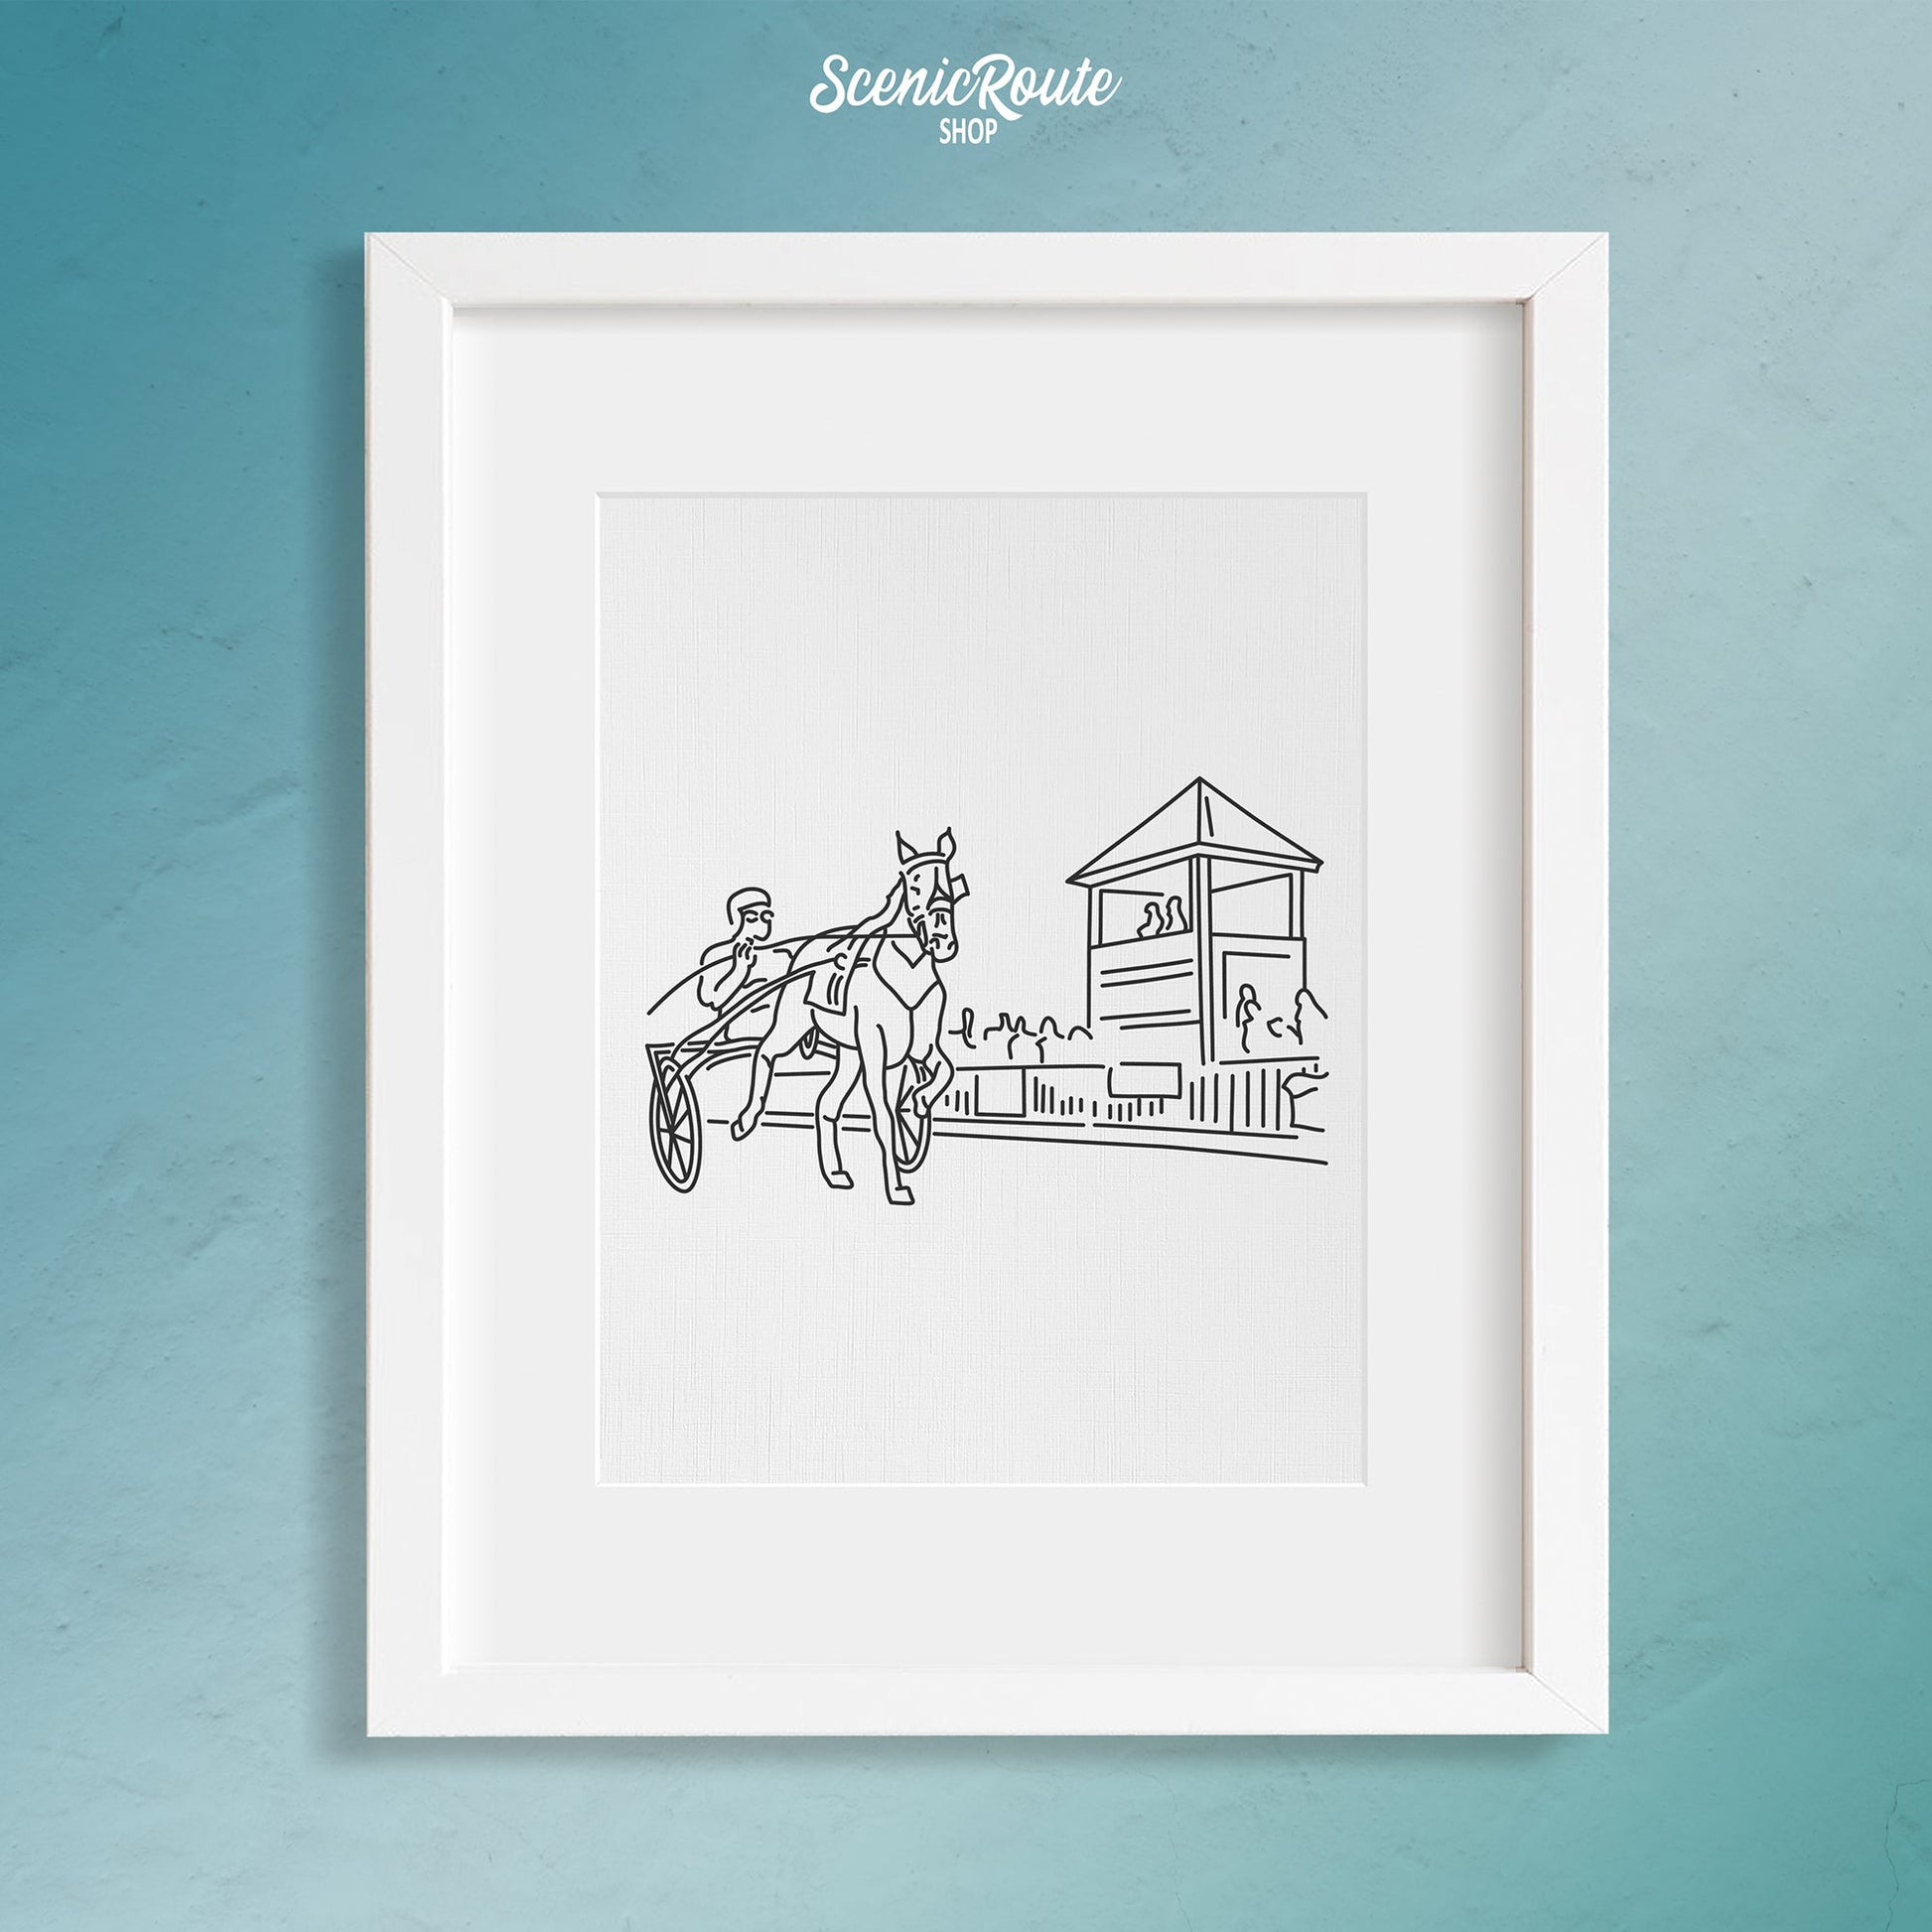 A framed line art drawing of Harness Racing on a blue wall